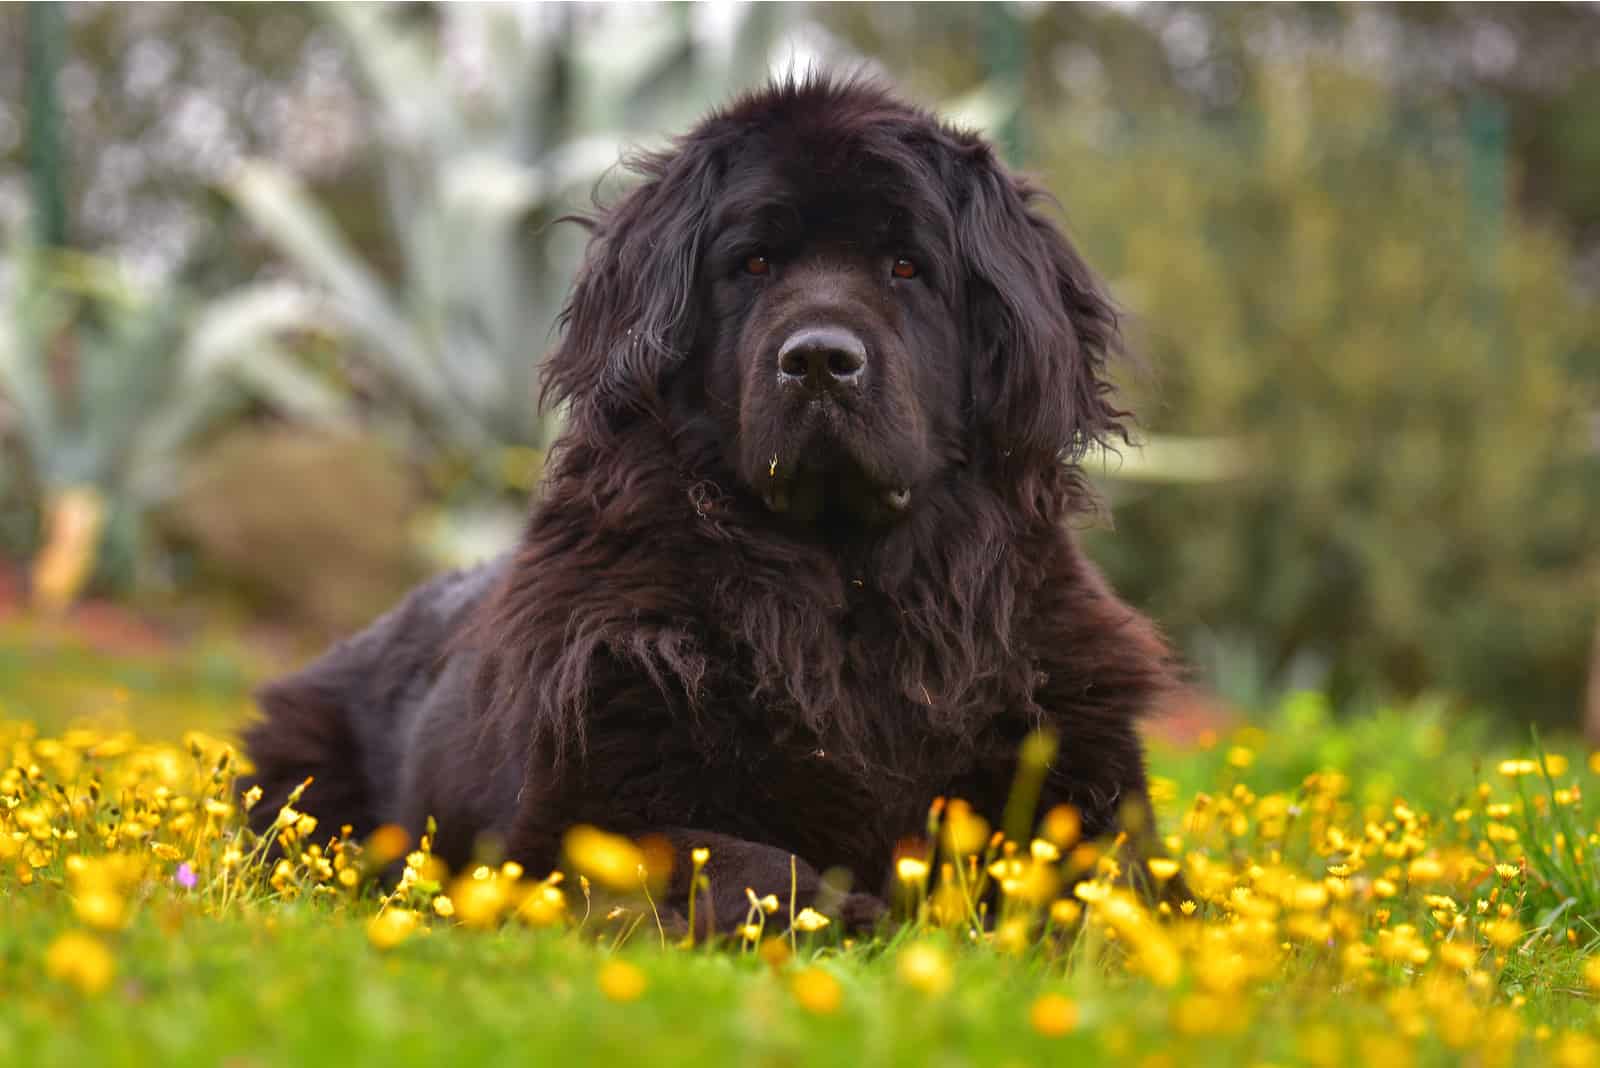 Newfoundland lies on the grass and rests